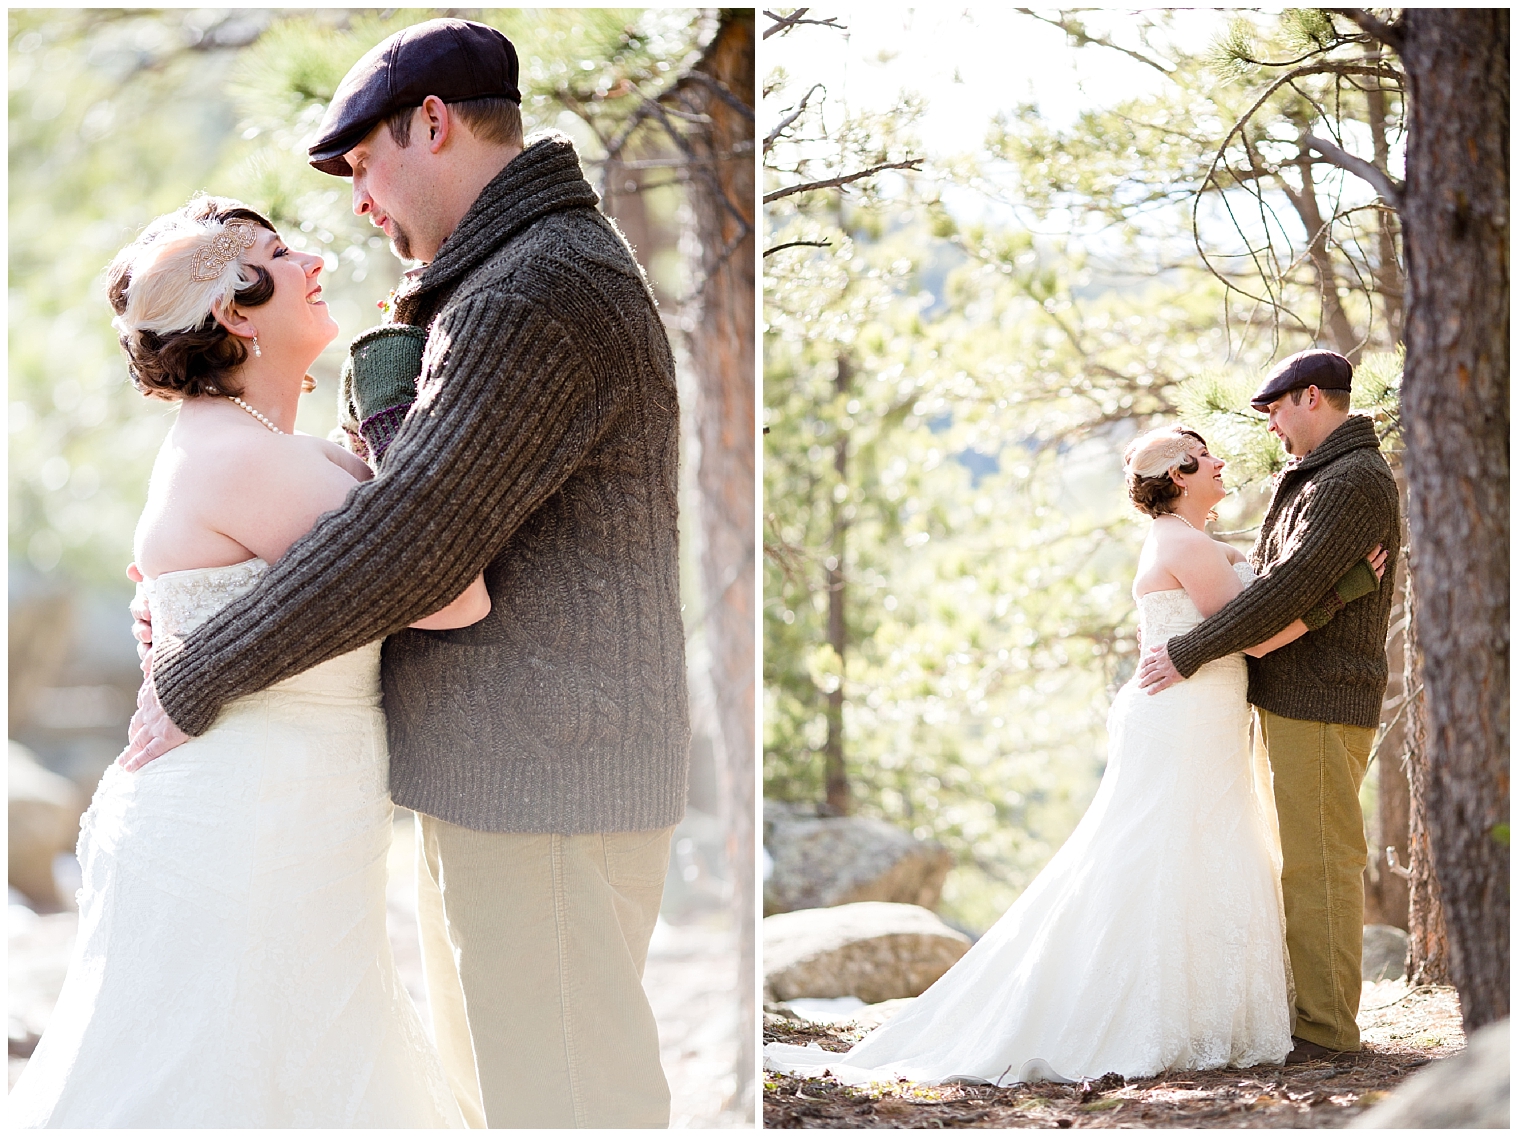 The wedding couple embrace one another at their Boulder elopement.